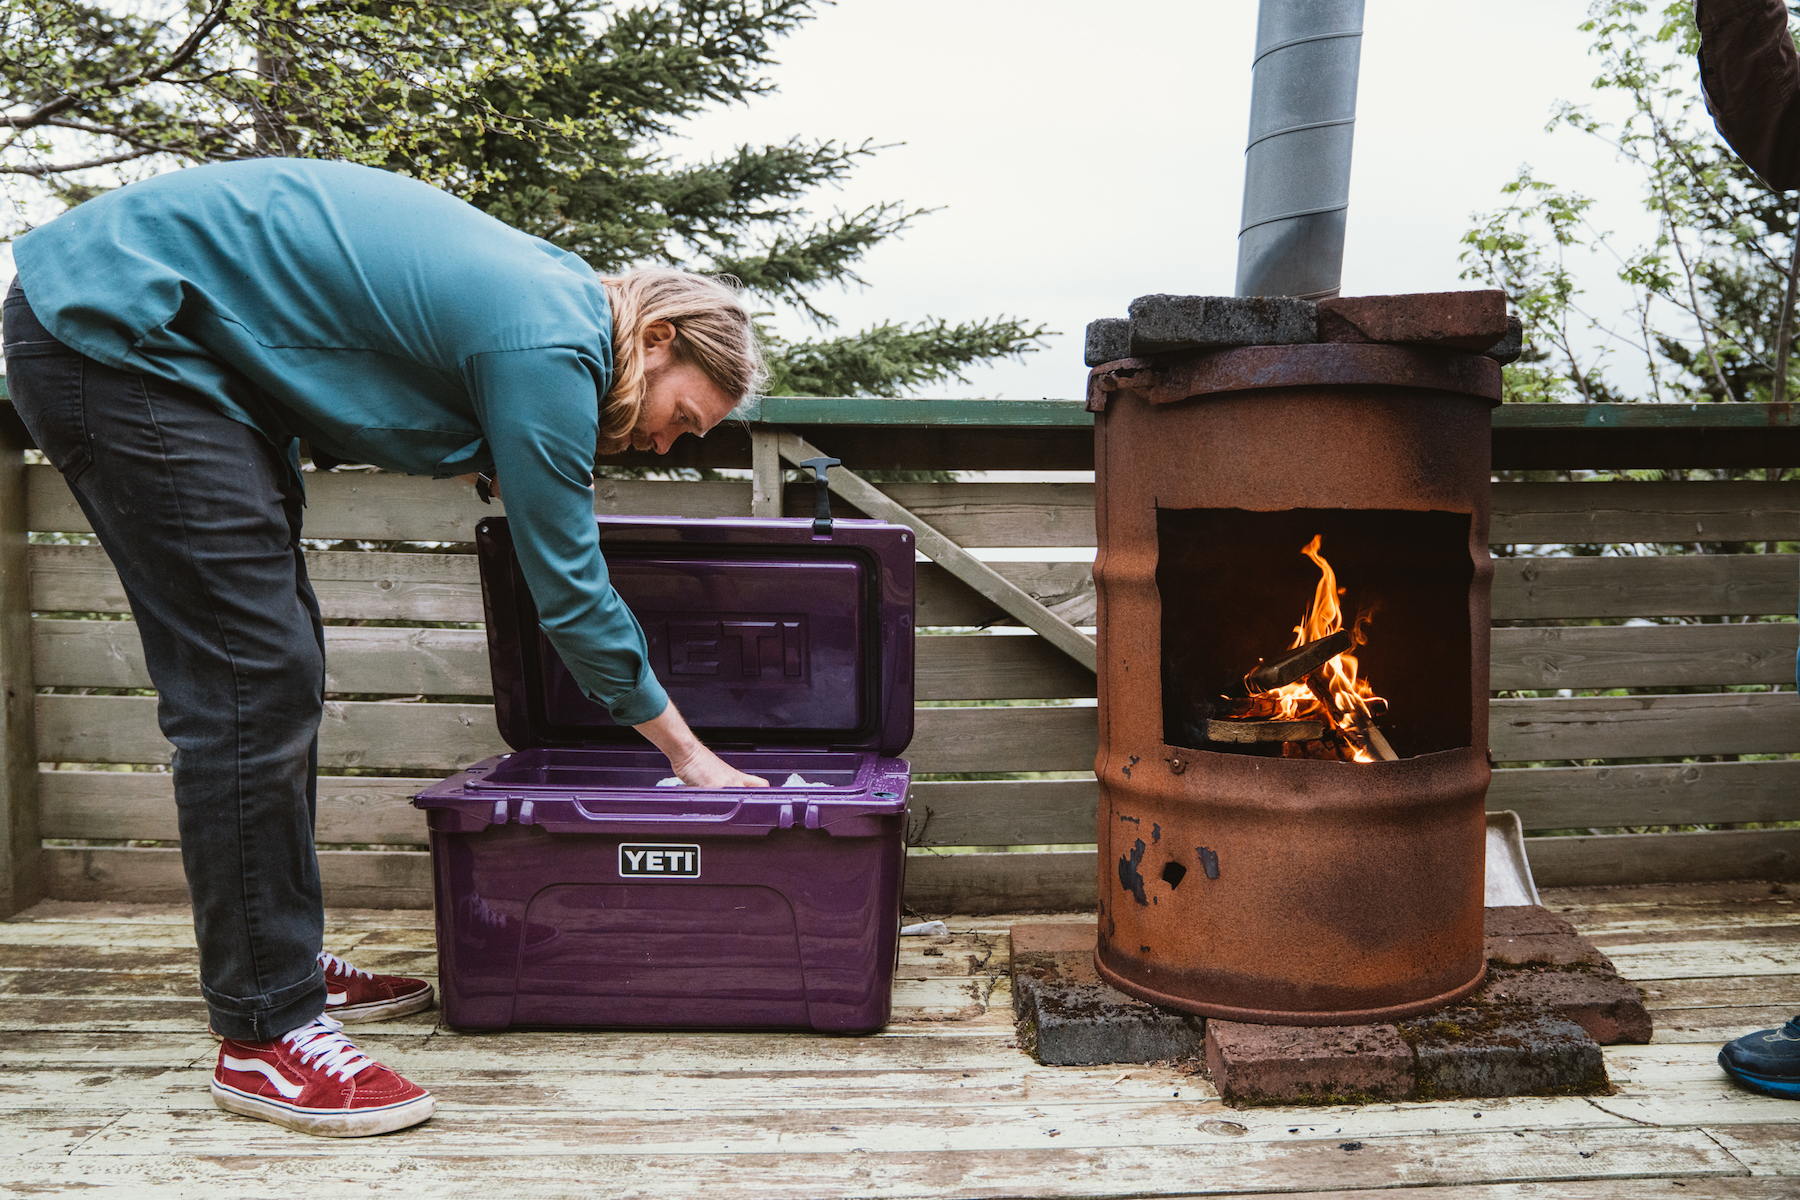 YETI Nordic Purple Coolers Are 20% Off Right Now - BroBible